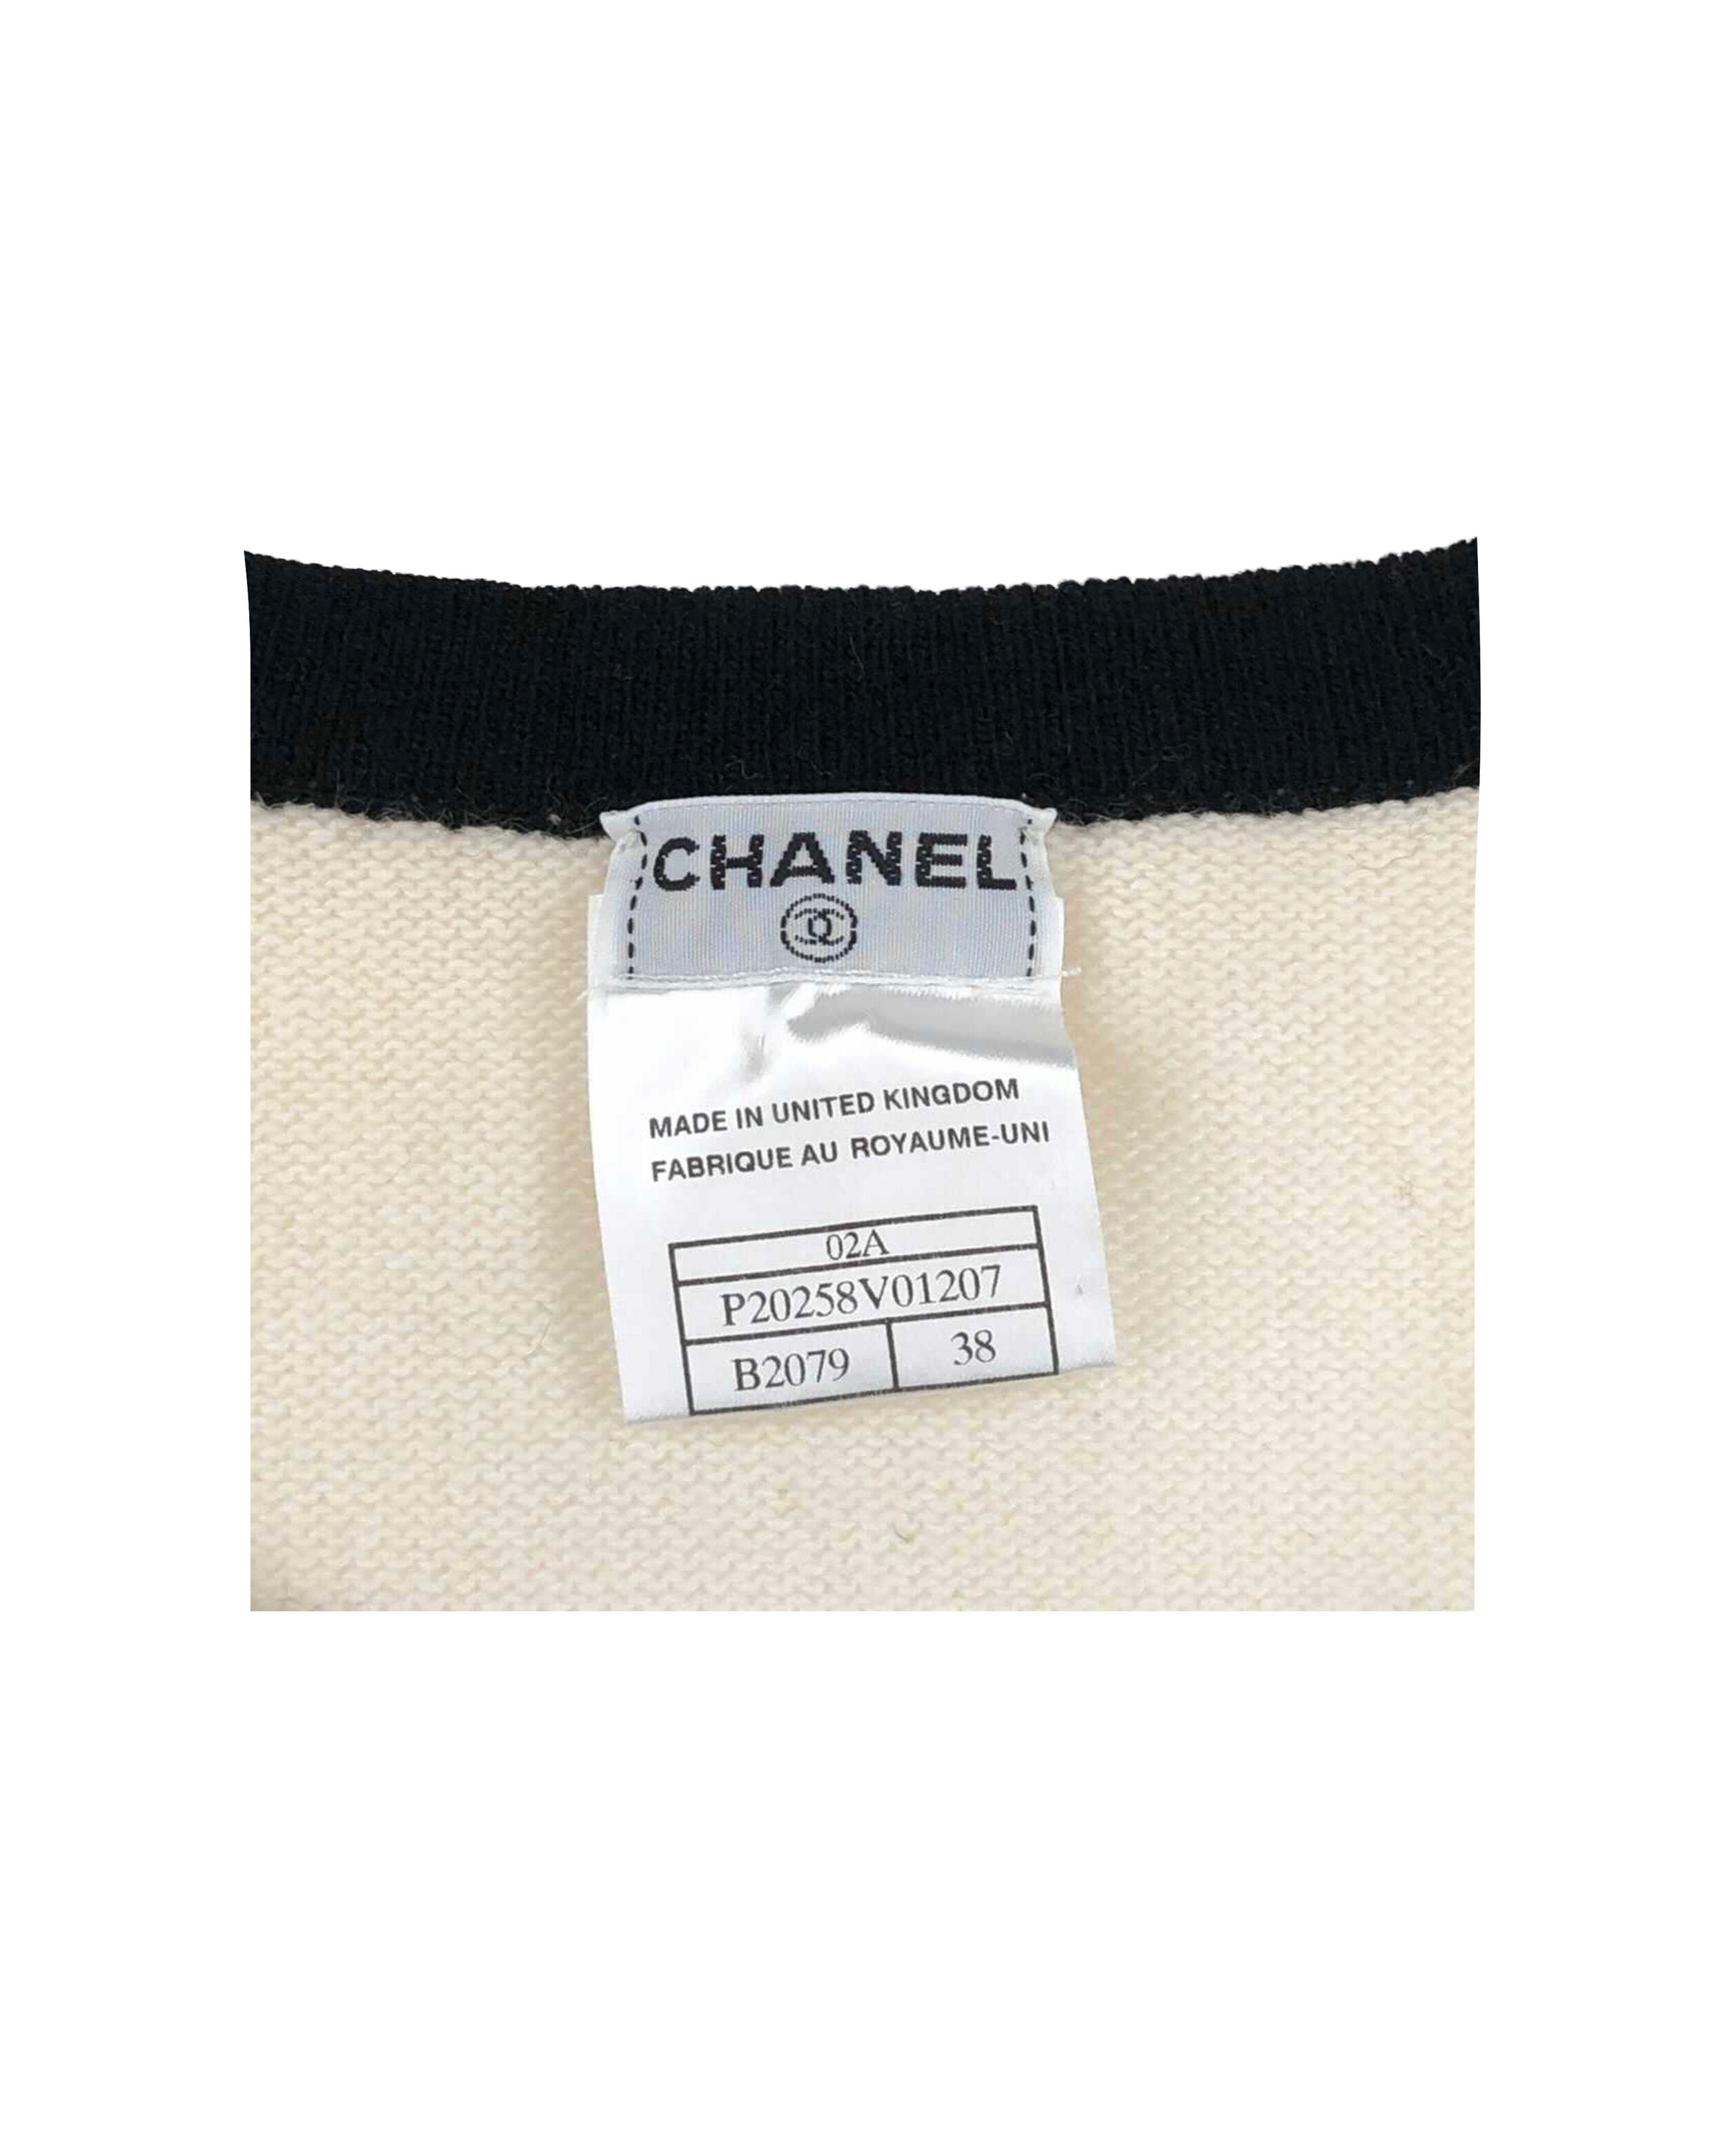 Chanel 20P Ad Campaign Cashmere Cardigan / Jacket